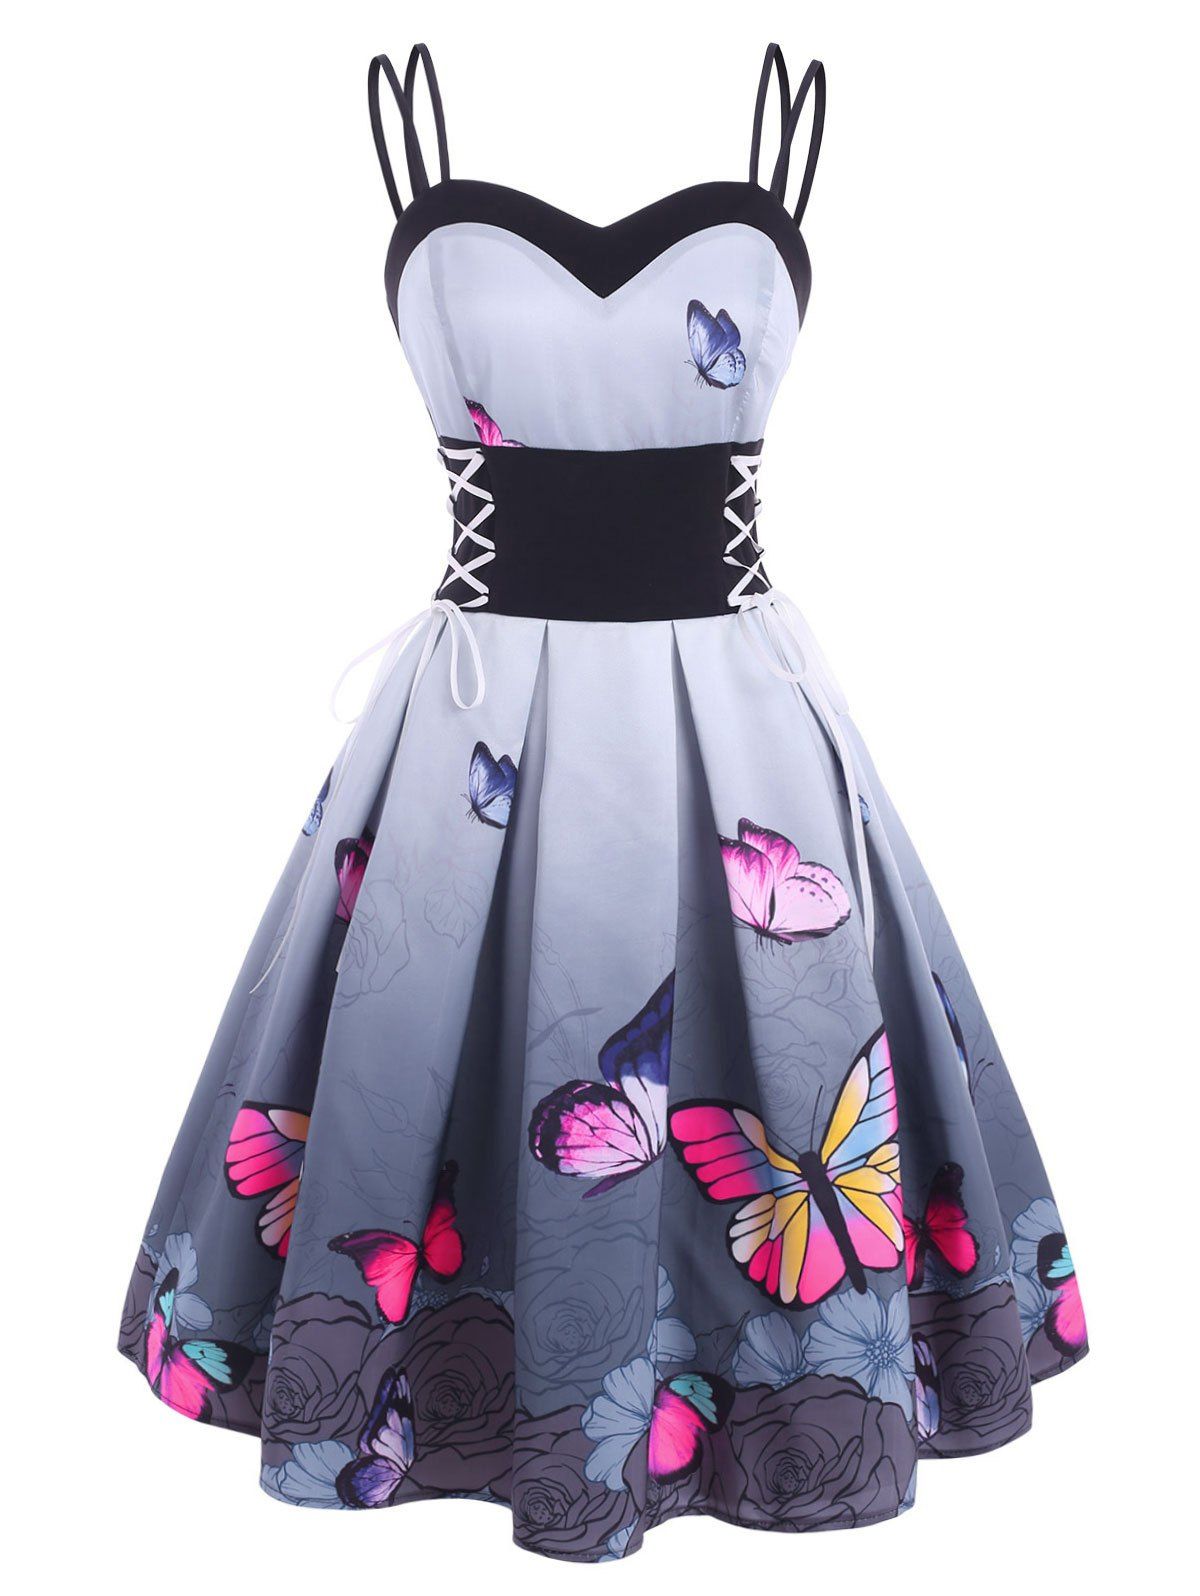 Lace Up Dual Strap Skull Butterfly Print Dress - LIGHT BLUE S